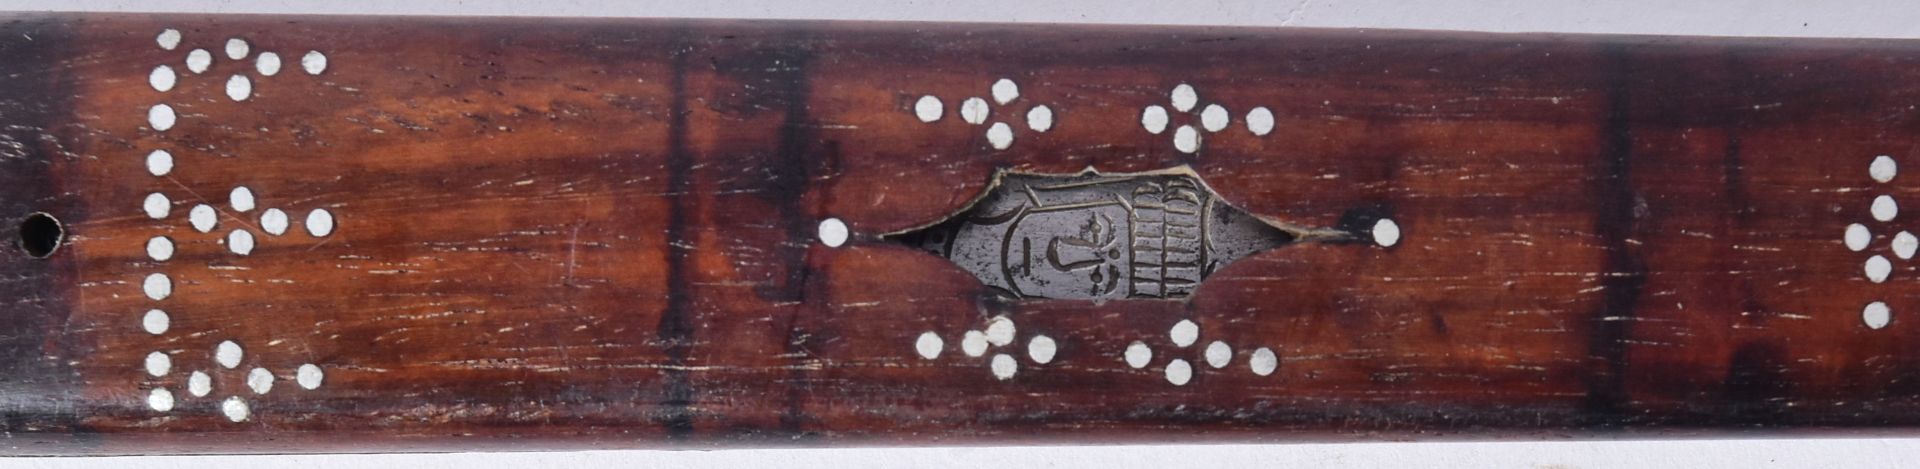 EARLY 20TH CENTURY PERSIAN DAGGER - Image 6 of 6